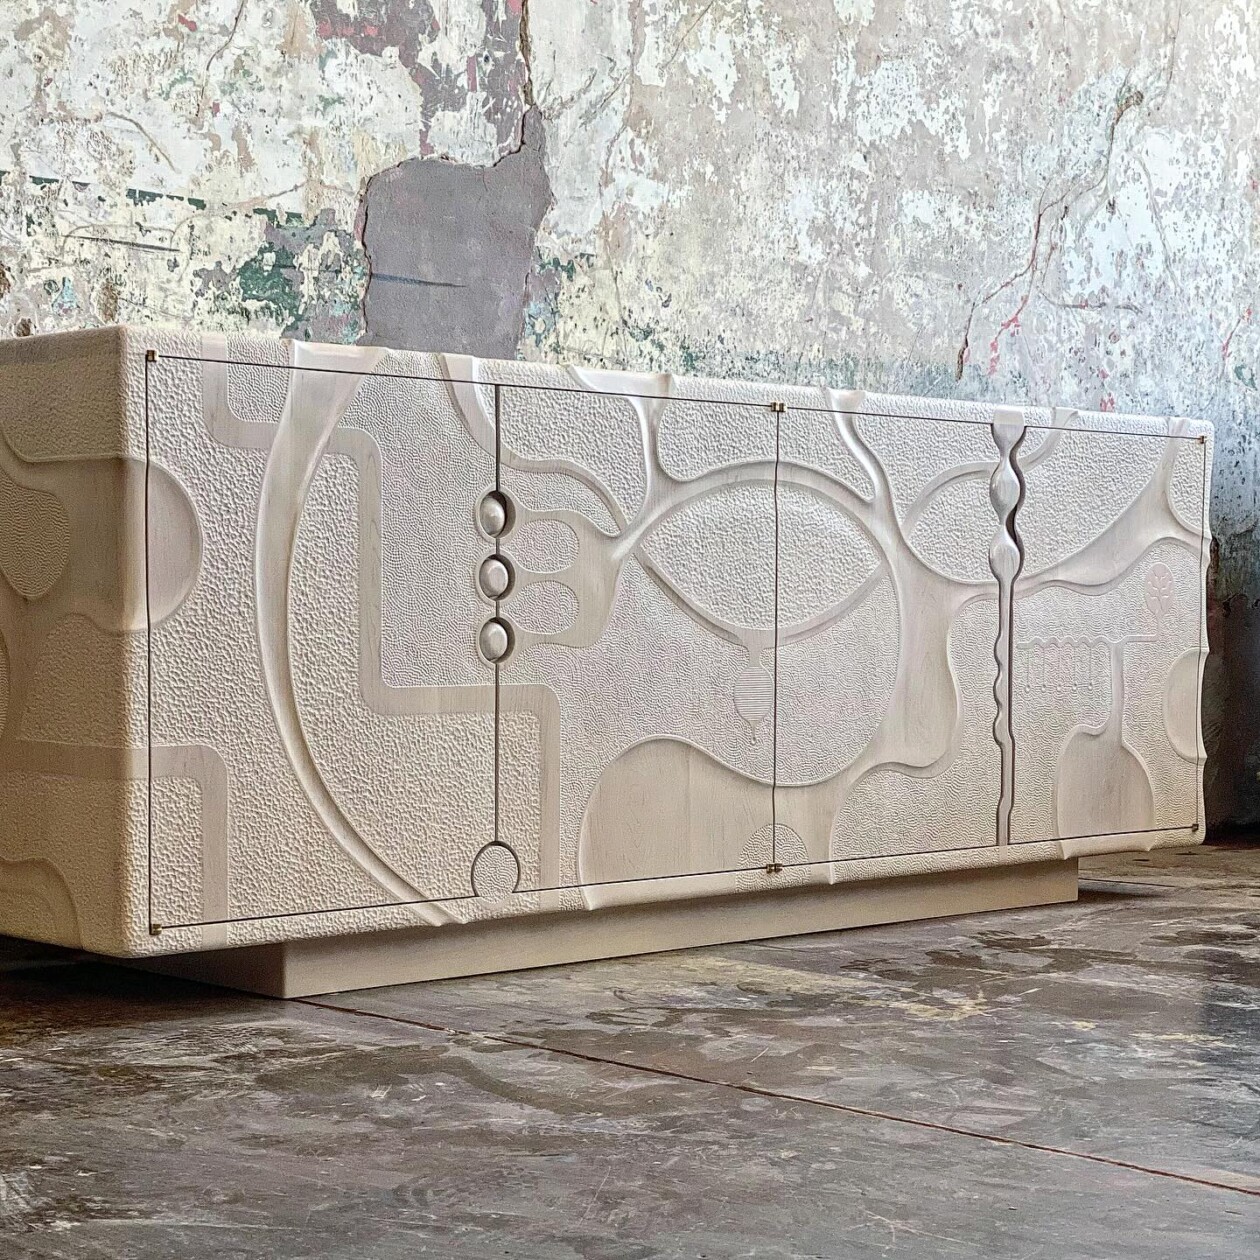 Intricately Engraved And Textured Organic Shaped Furniture By Caleb Woodard (15)